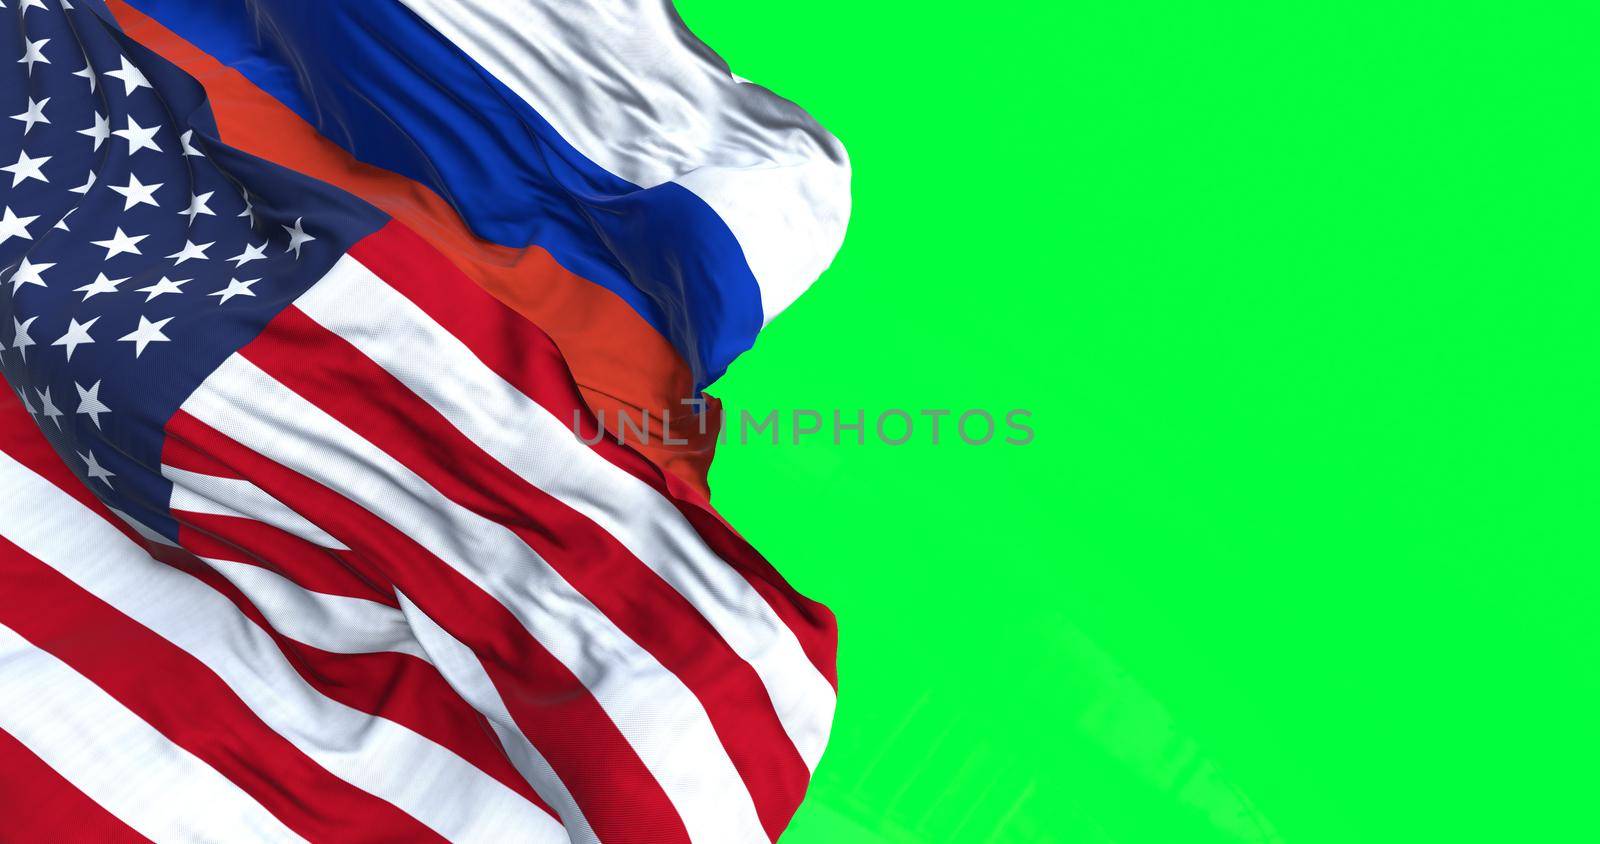 The flags of USA and Russia waving in the wind isolated over a green background. Russia and the United States maintain globally significant and strategic foreign-relations ties